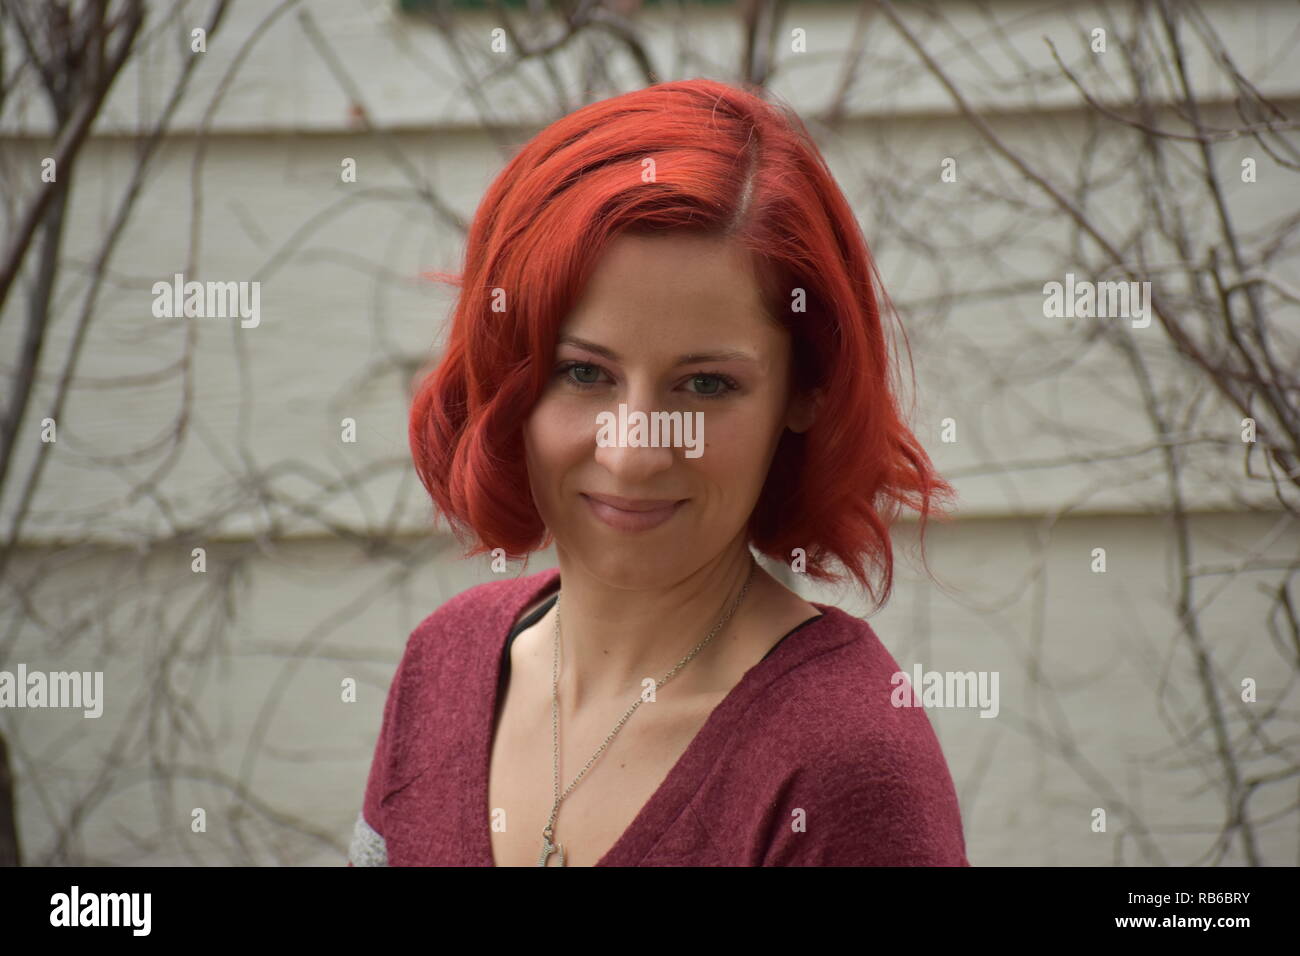 Pretty Red Haired Lady Stock Photo